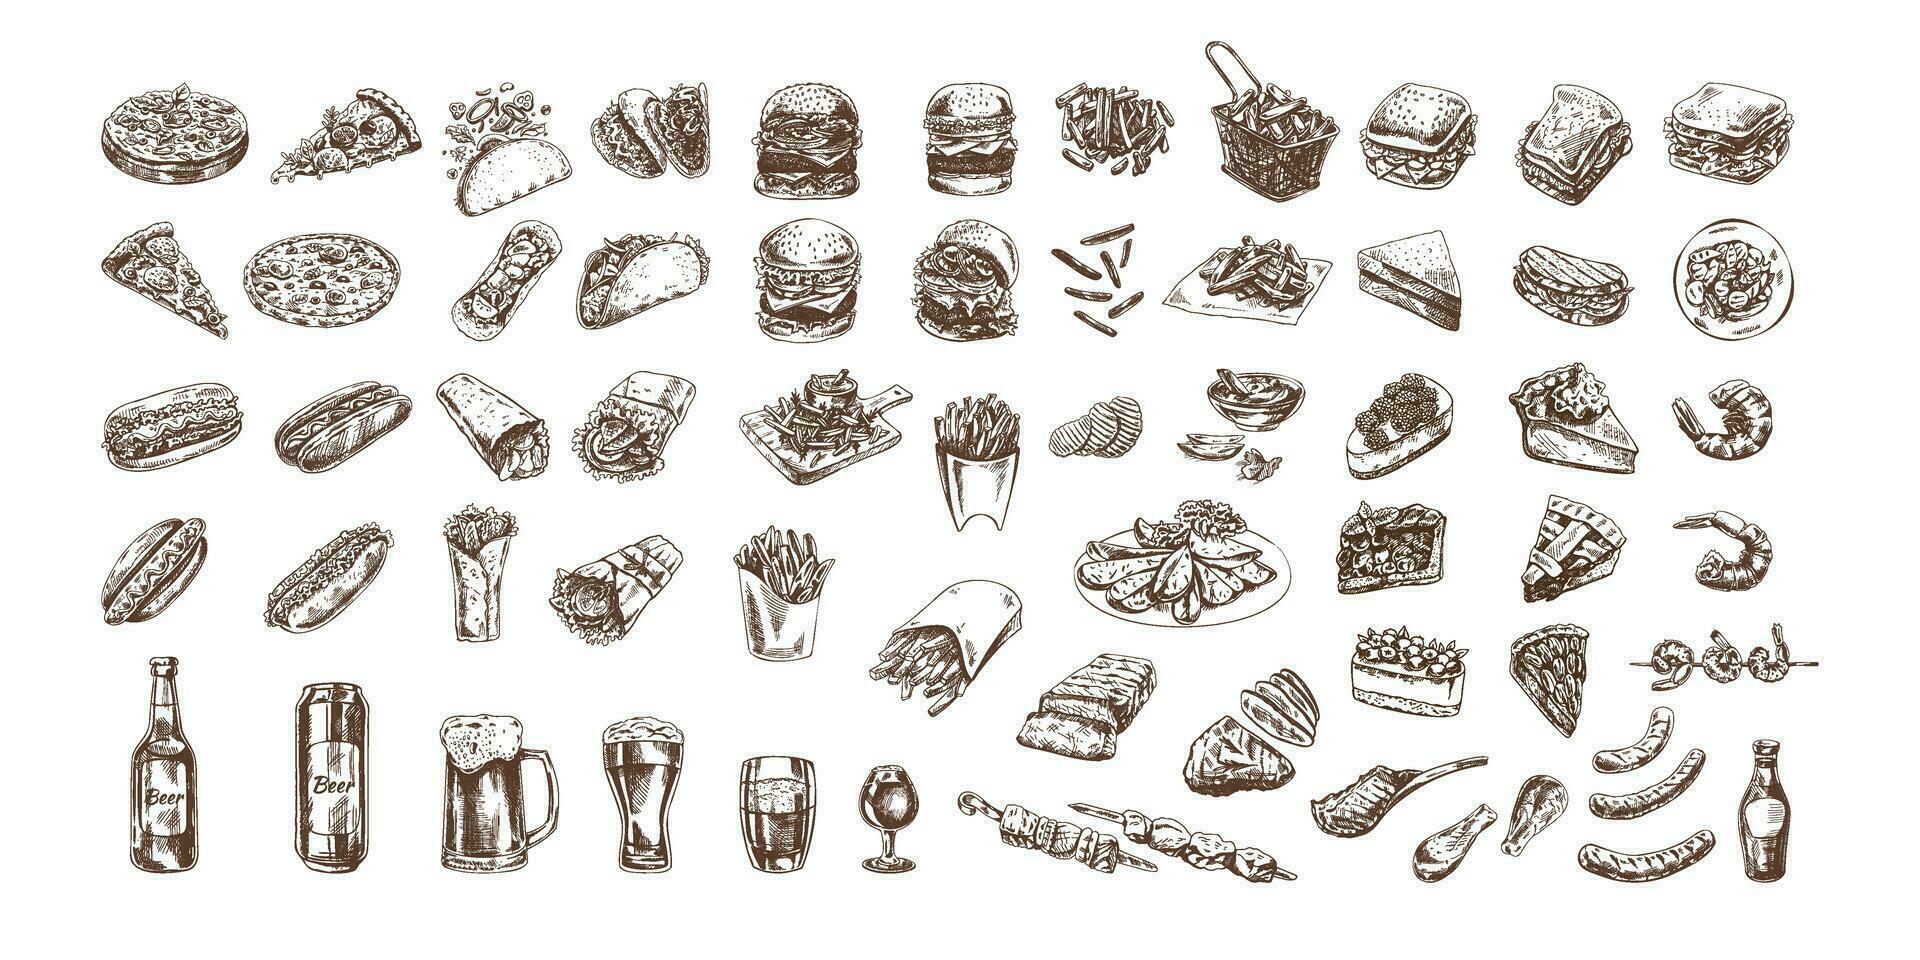 Hand-drawn sketch of street food, takeaway food, fast food, junk food and drinks. Burgers, potato french fries, chips, pizza, hot dogs, burritos, tacos, beer, bbq, meat, pies set. Great for menu. vector